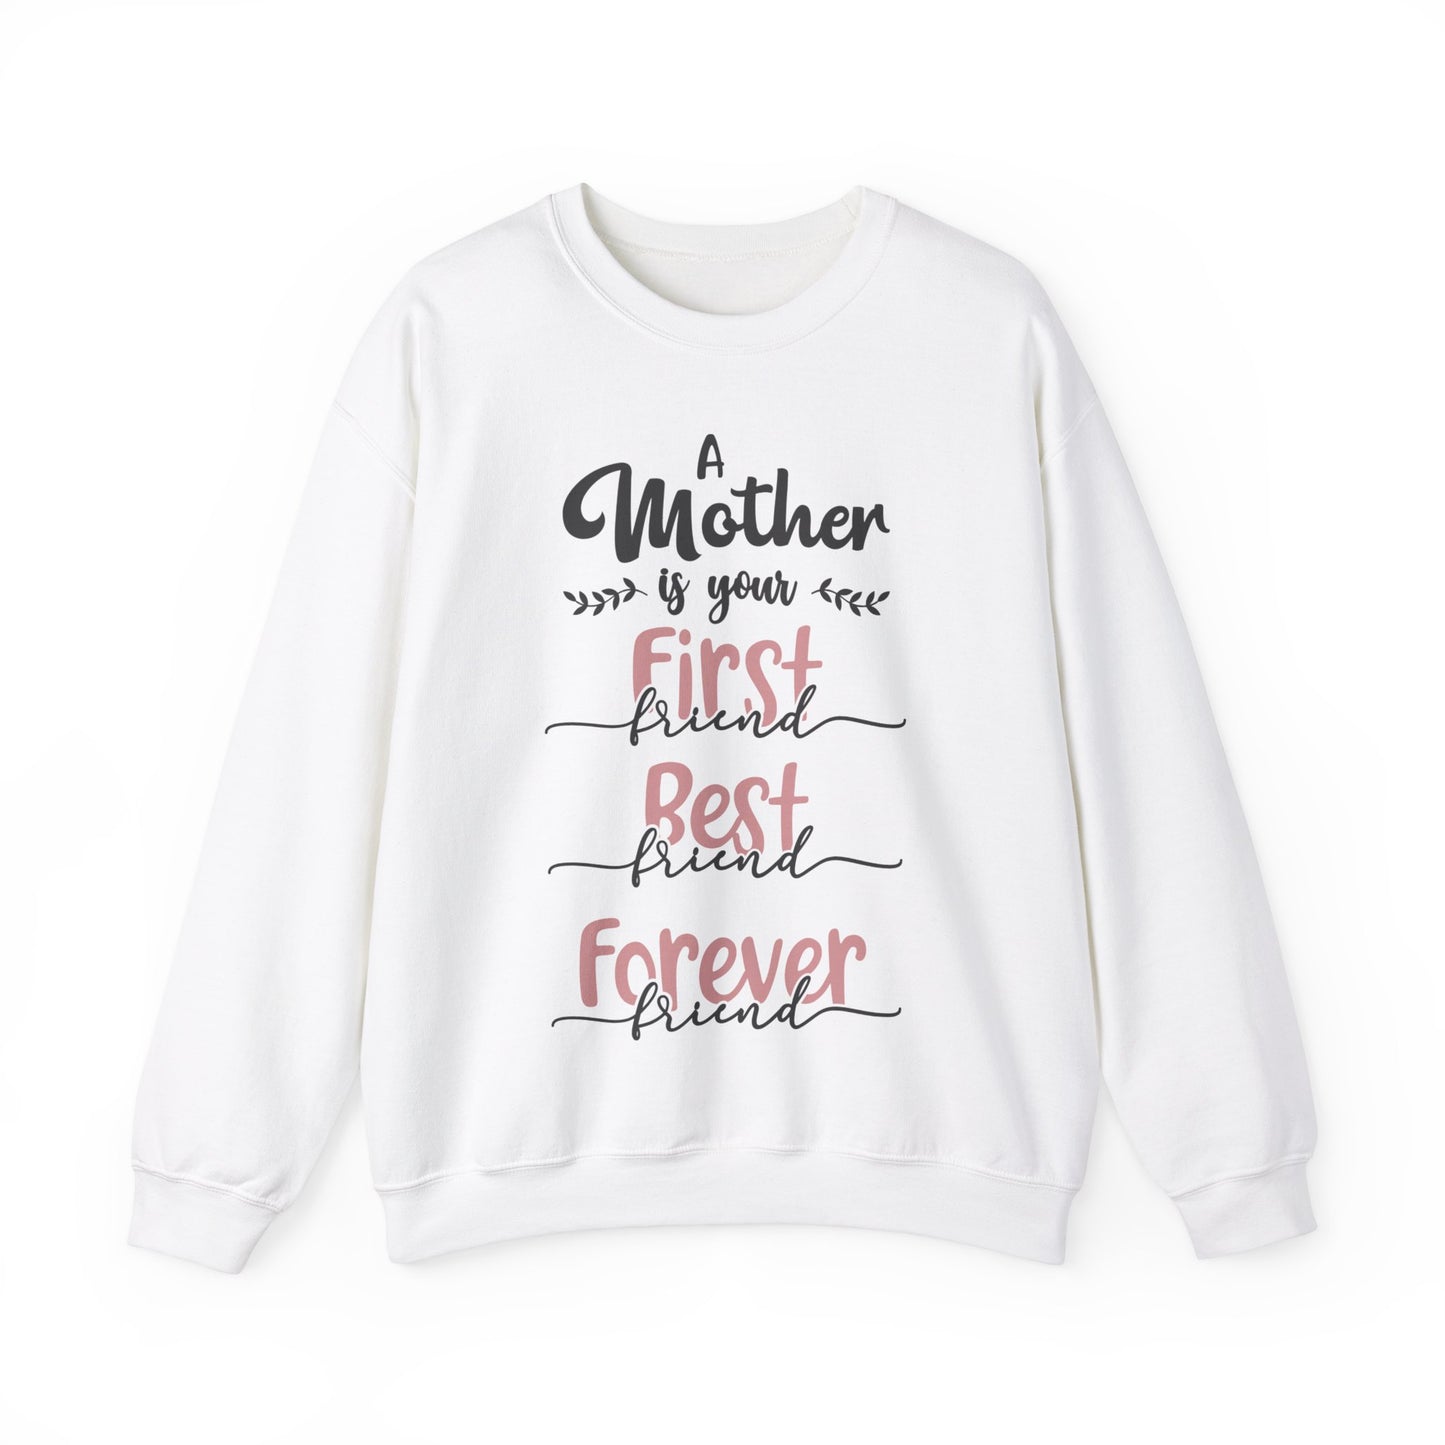 A Mother is your first, best, forever friend - Unisex Heavy Blend™ Crewneck Sweatshirt